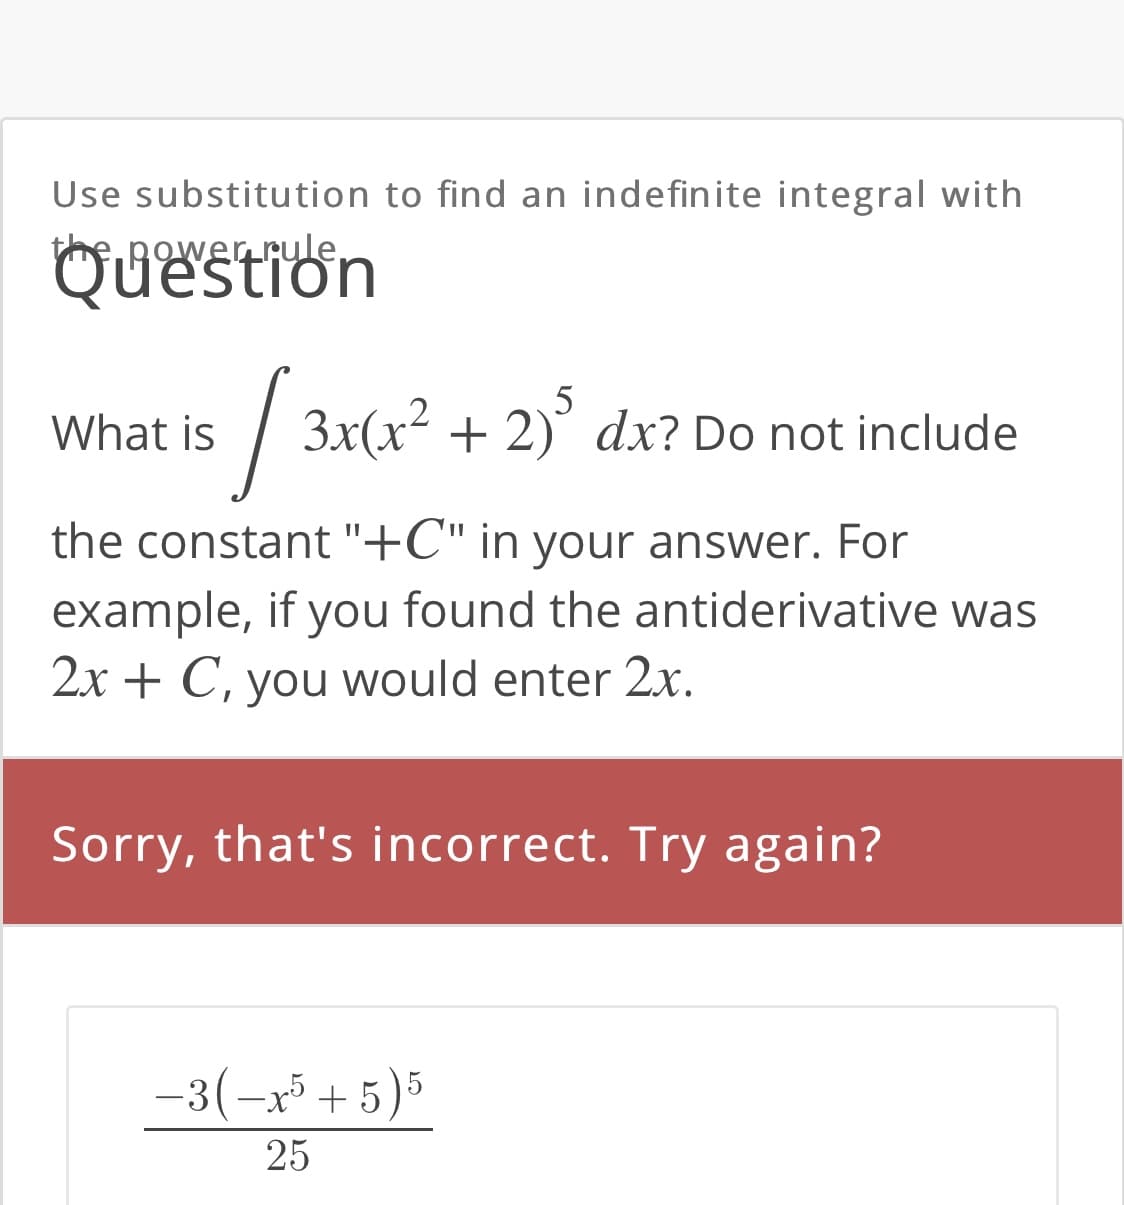 Use substitution to find an indefinite integral with
he.power rule,
QUestion
5
What is / 3x(x² + 2)' dx? Do not include
the constant "+C" in your answer. For
example, if you found the antiderivative was
2x + C, you would enter 2x.
Sorry, that's incorrect. Try again?
-3(-x + 5)5
25
